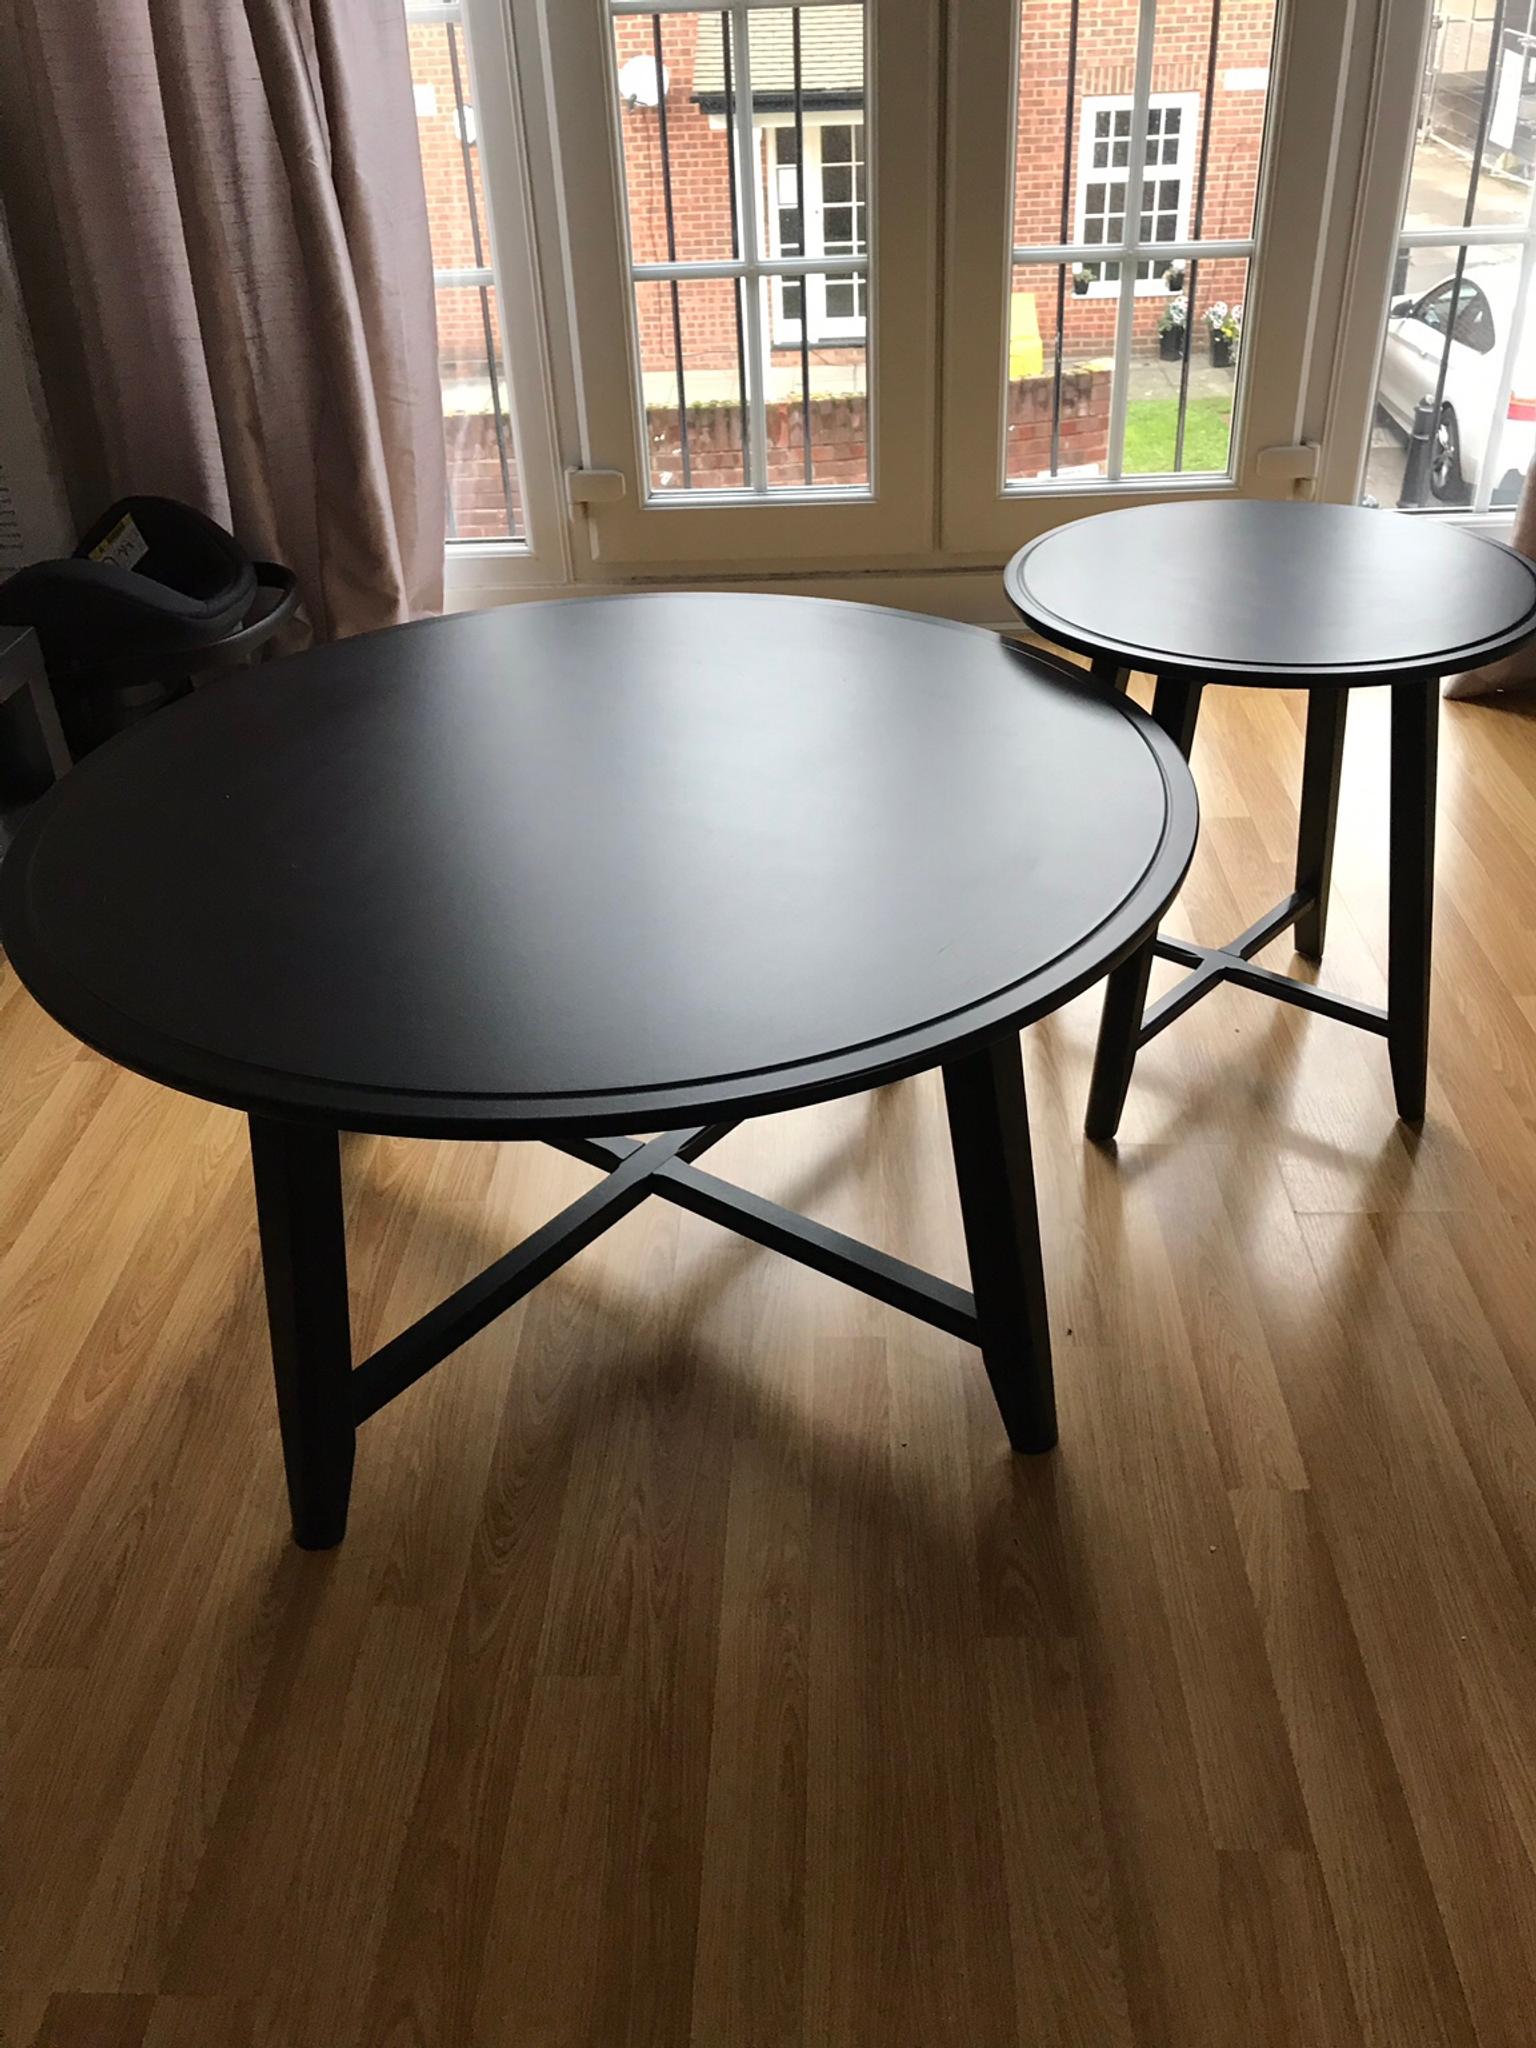 Kragsta Coffee Tables Black In Ig10 Forest For 40 00 For Sale